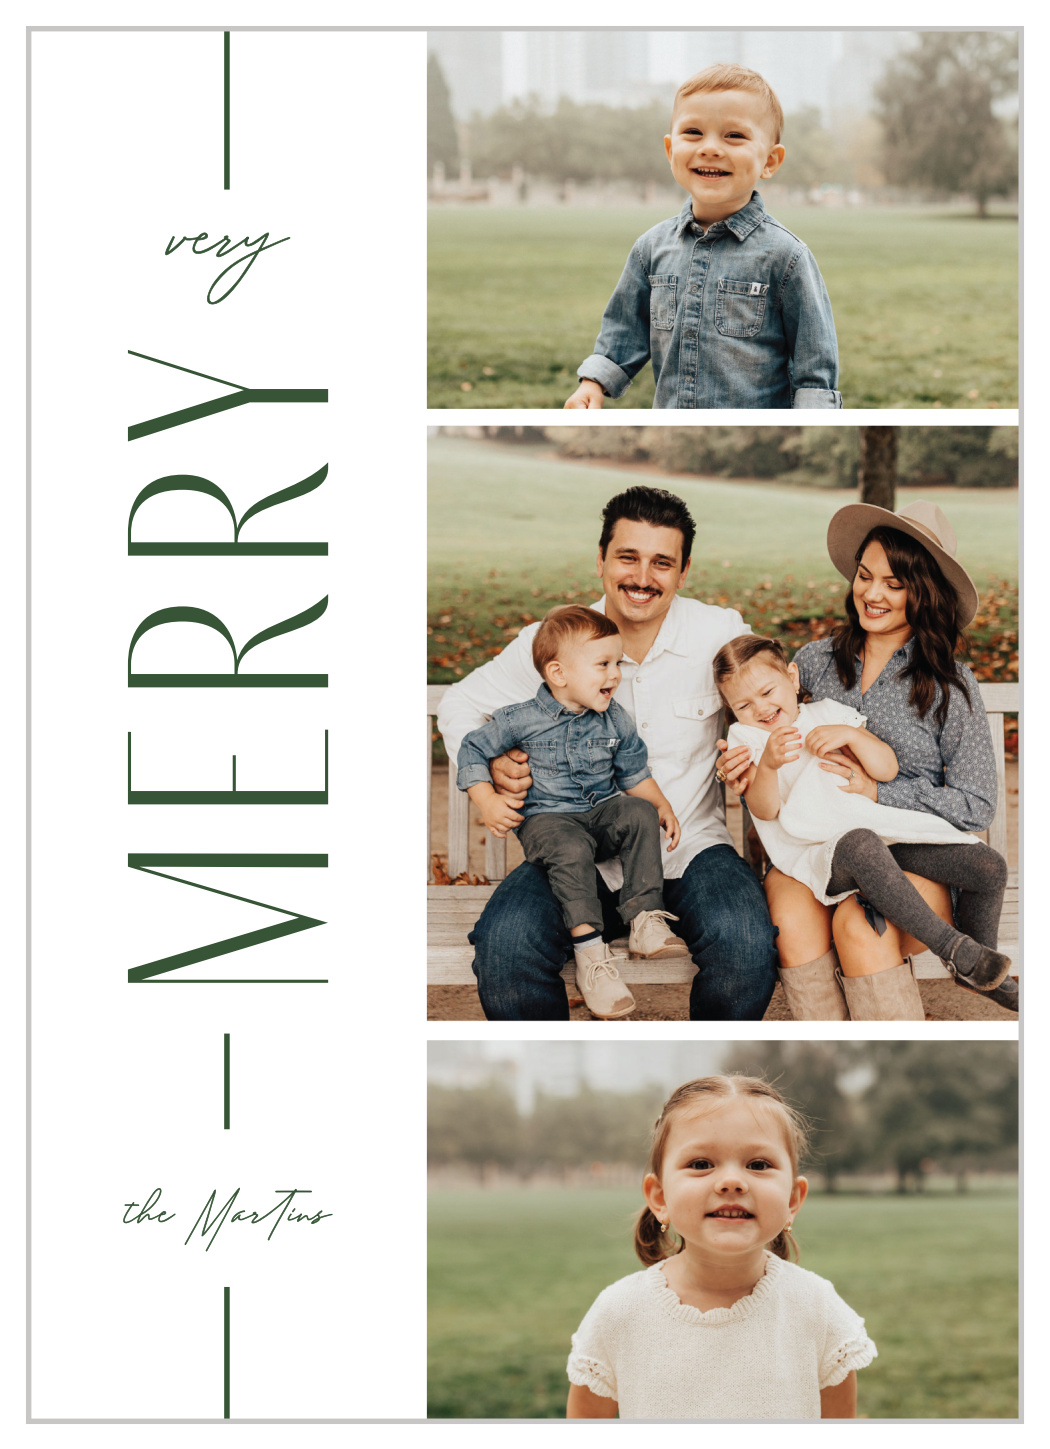 Merry Thread Holiday Cards